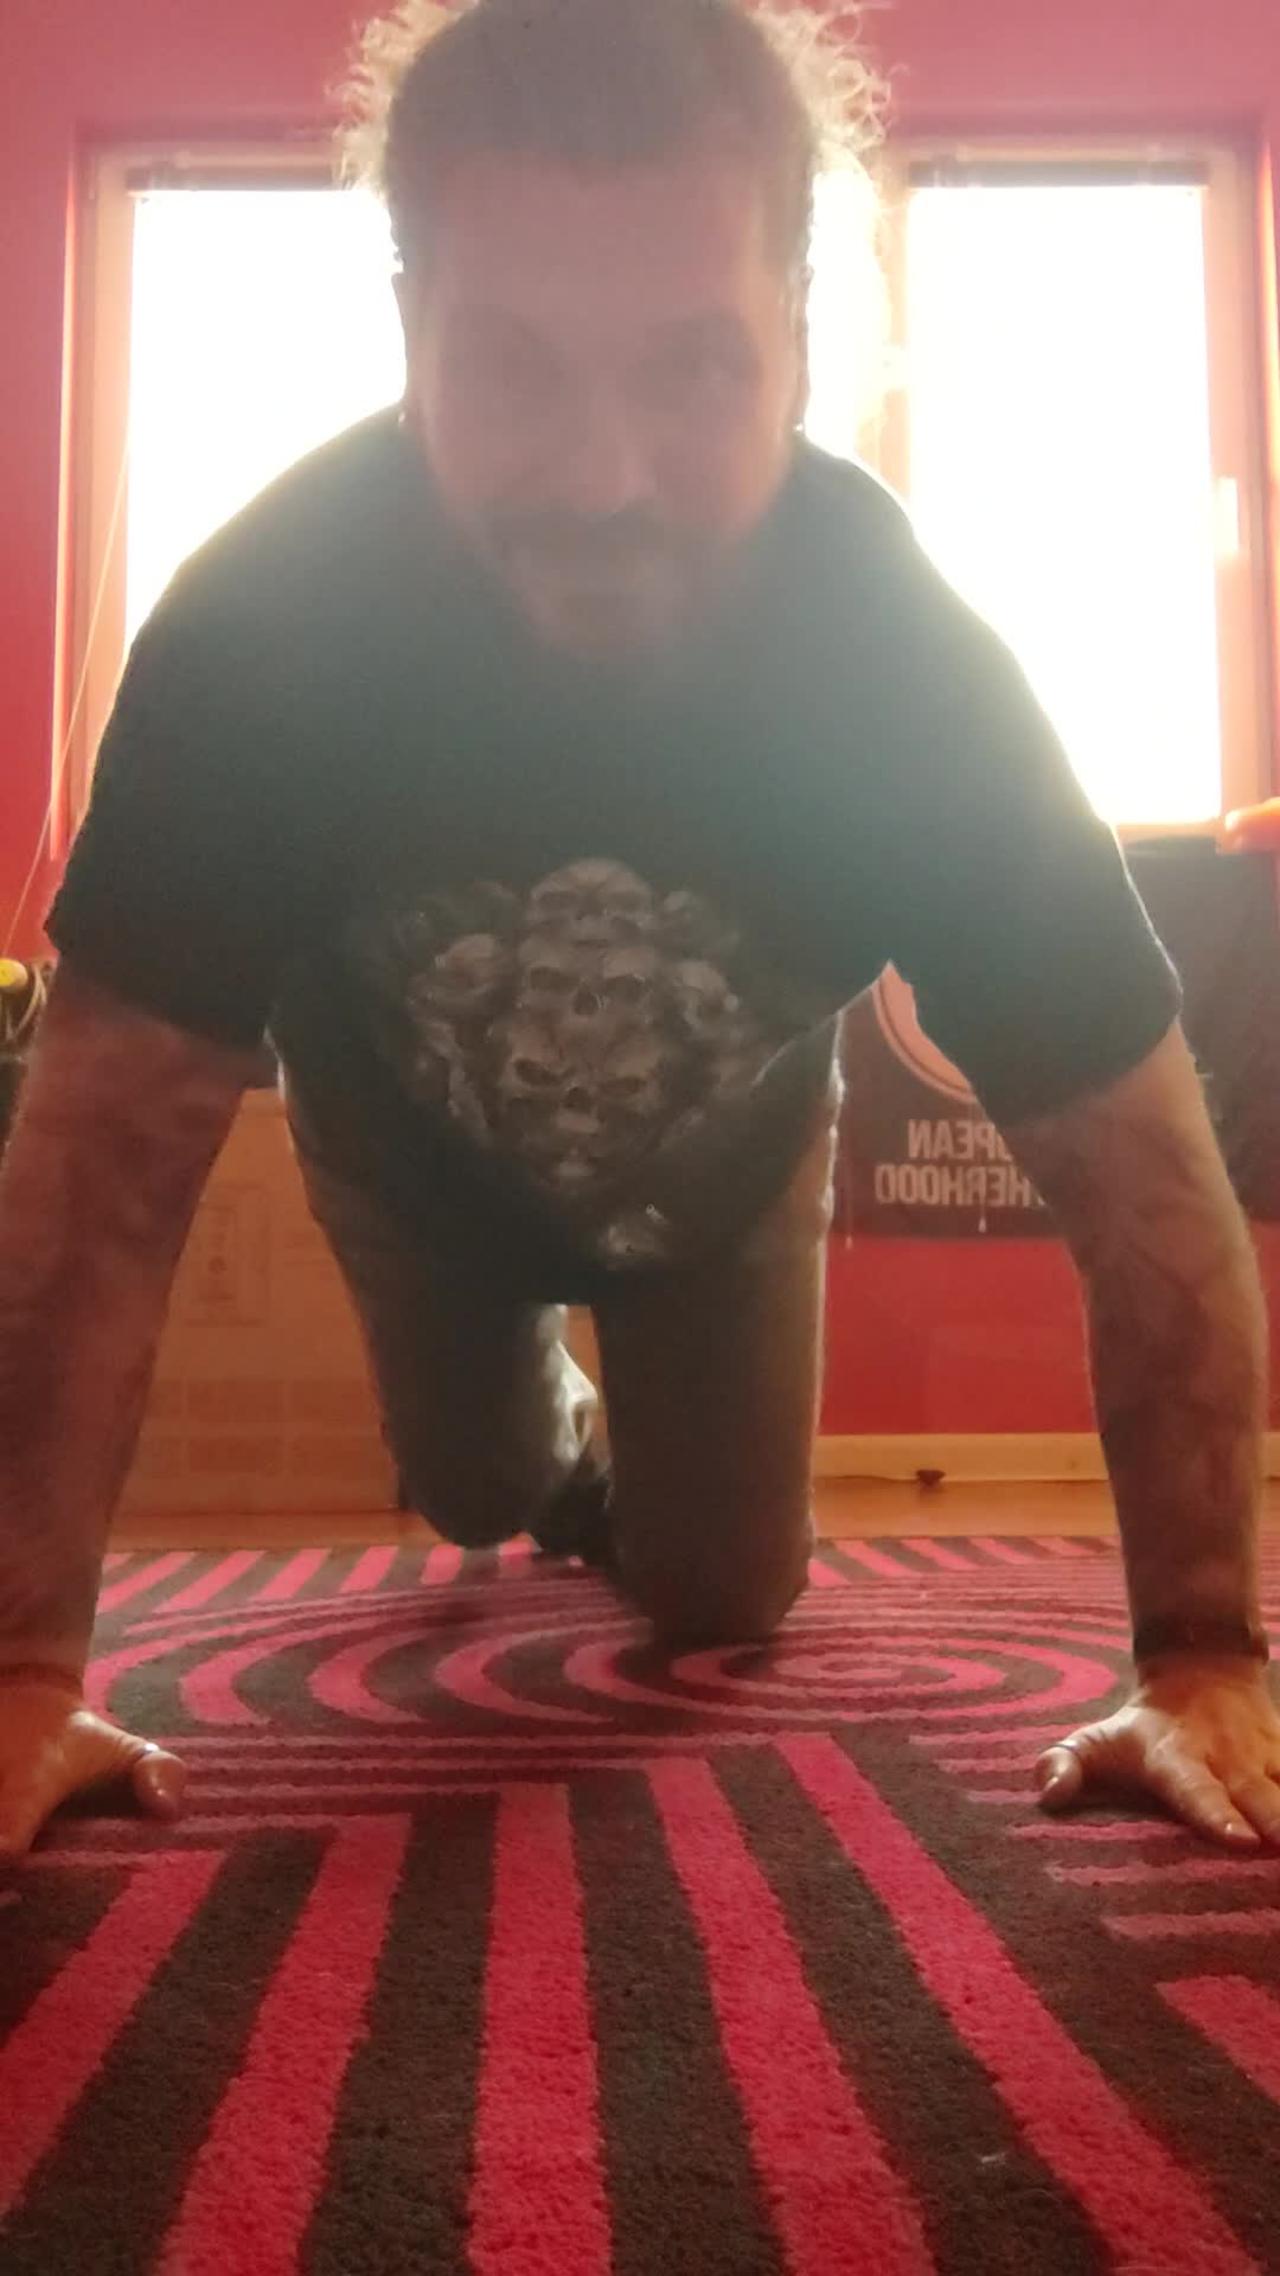 50 pushups MissionMaster@PEPE - DAY 7